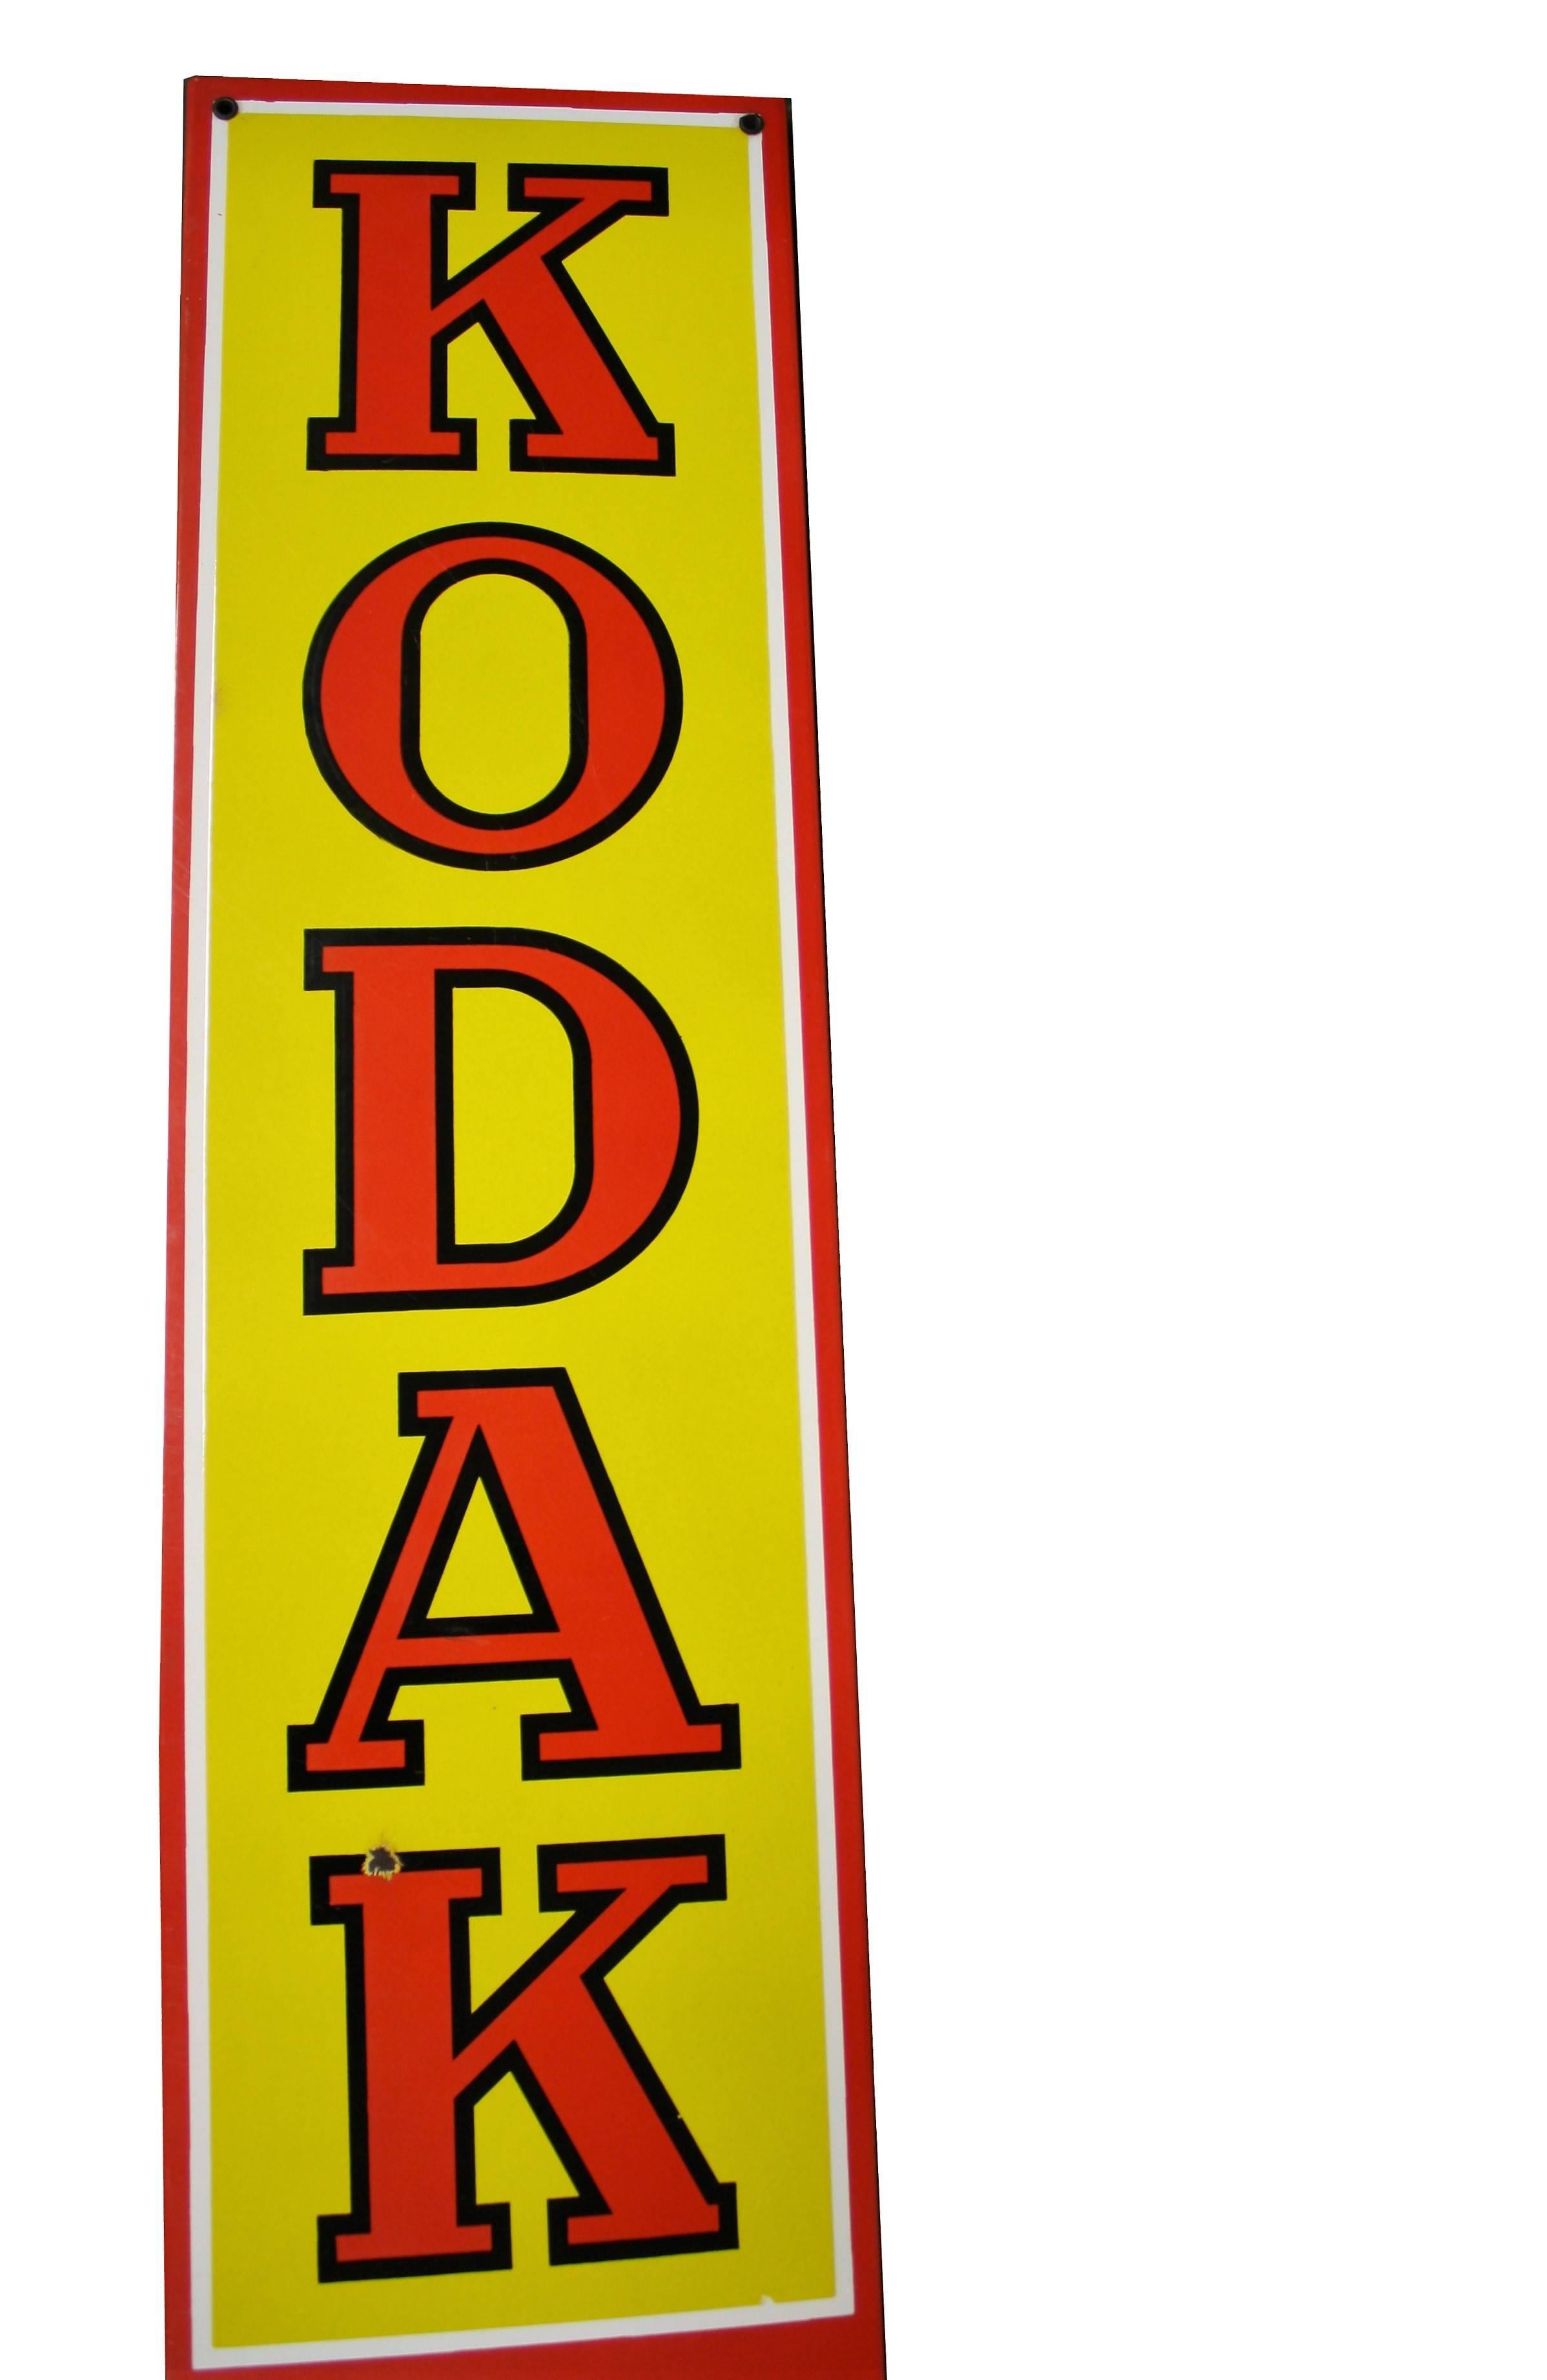 Vintage porcelain/enamel advertising sign 'Kodak'.

These signs where a common sight above local stores in villages and towns.

Kodak was very revolutionary at that time and a lot of advertising was done by this brand.

The famous red and